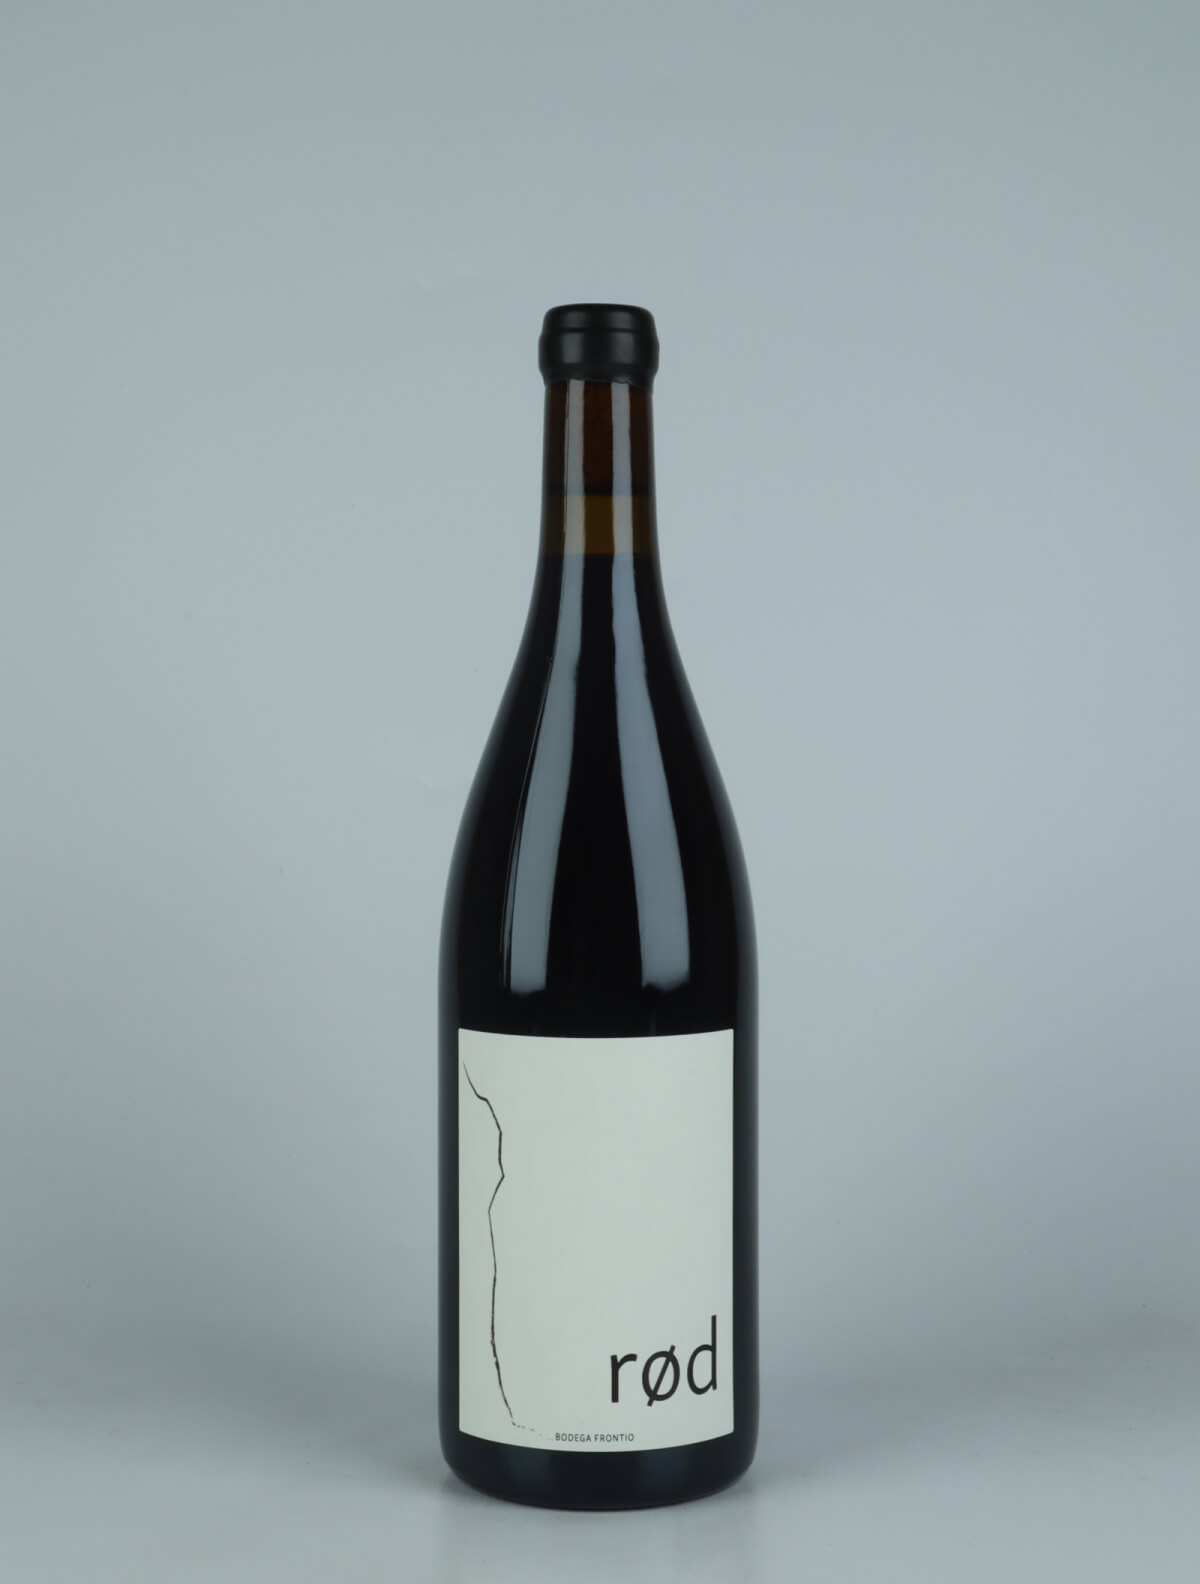 A bottle 2021 Rød Red wine from Bodega Frontio, Arribes in Spain